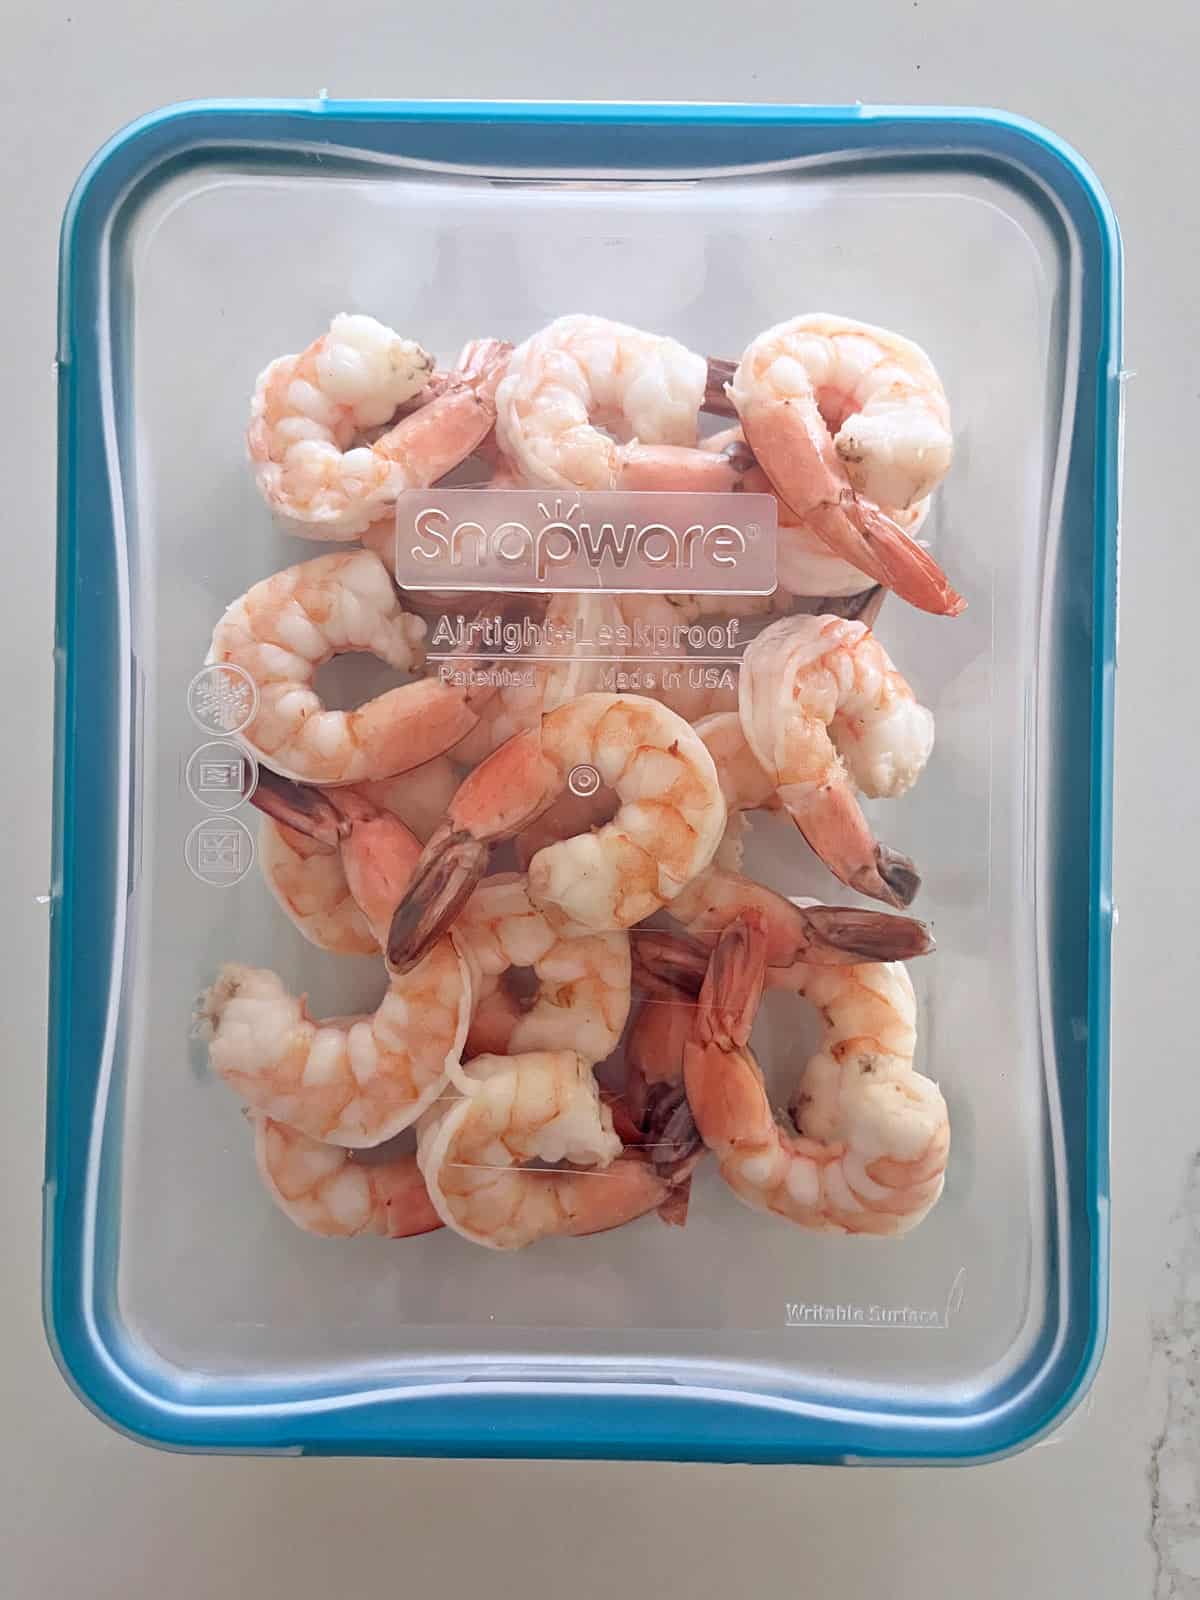 Leftover shrimps stored in a glass container.